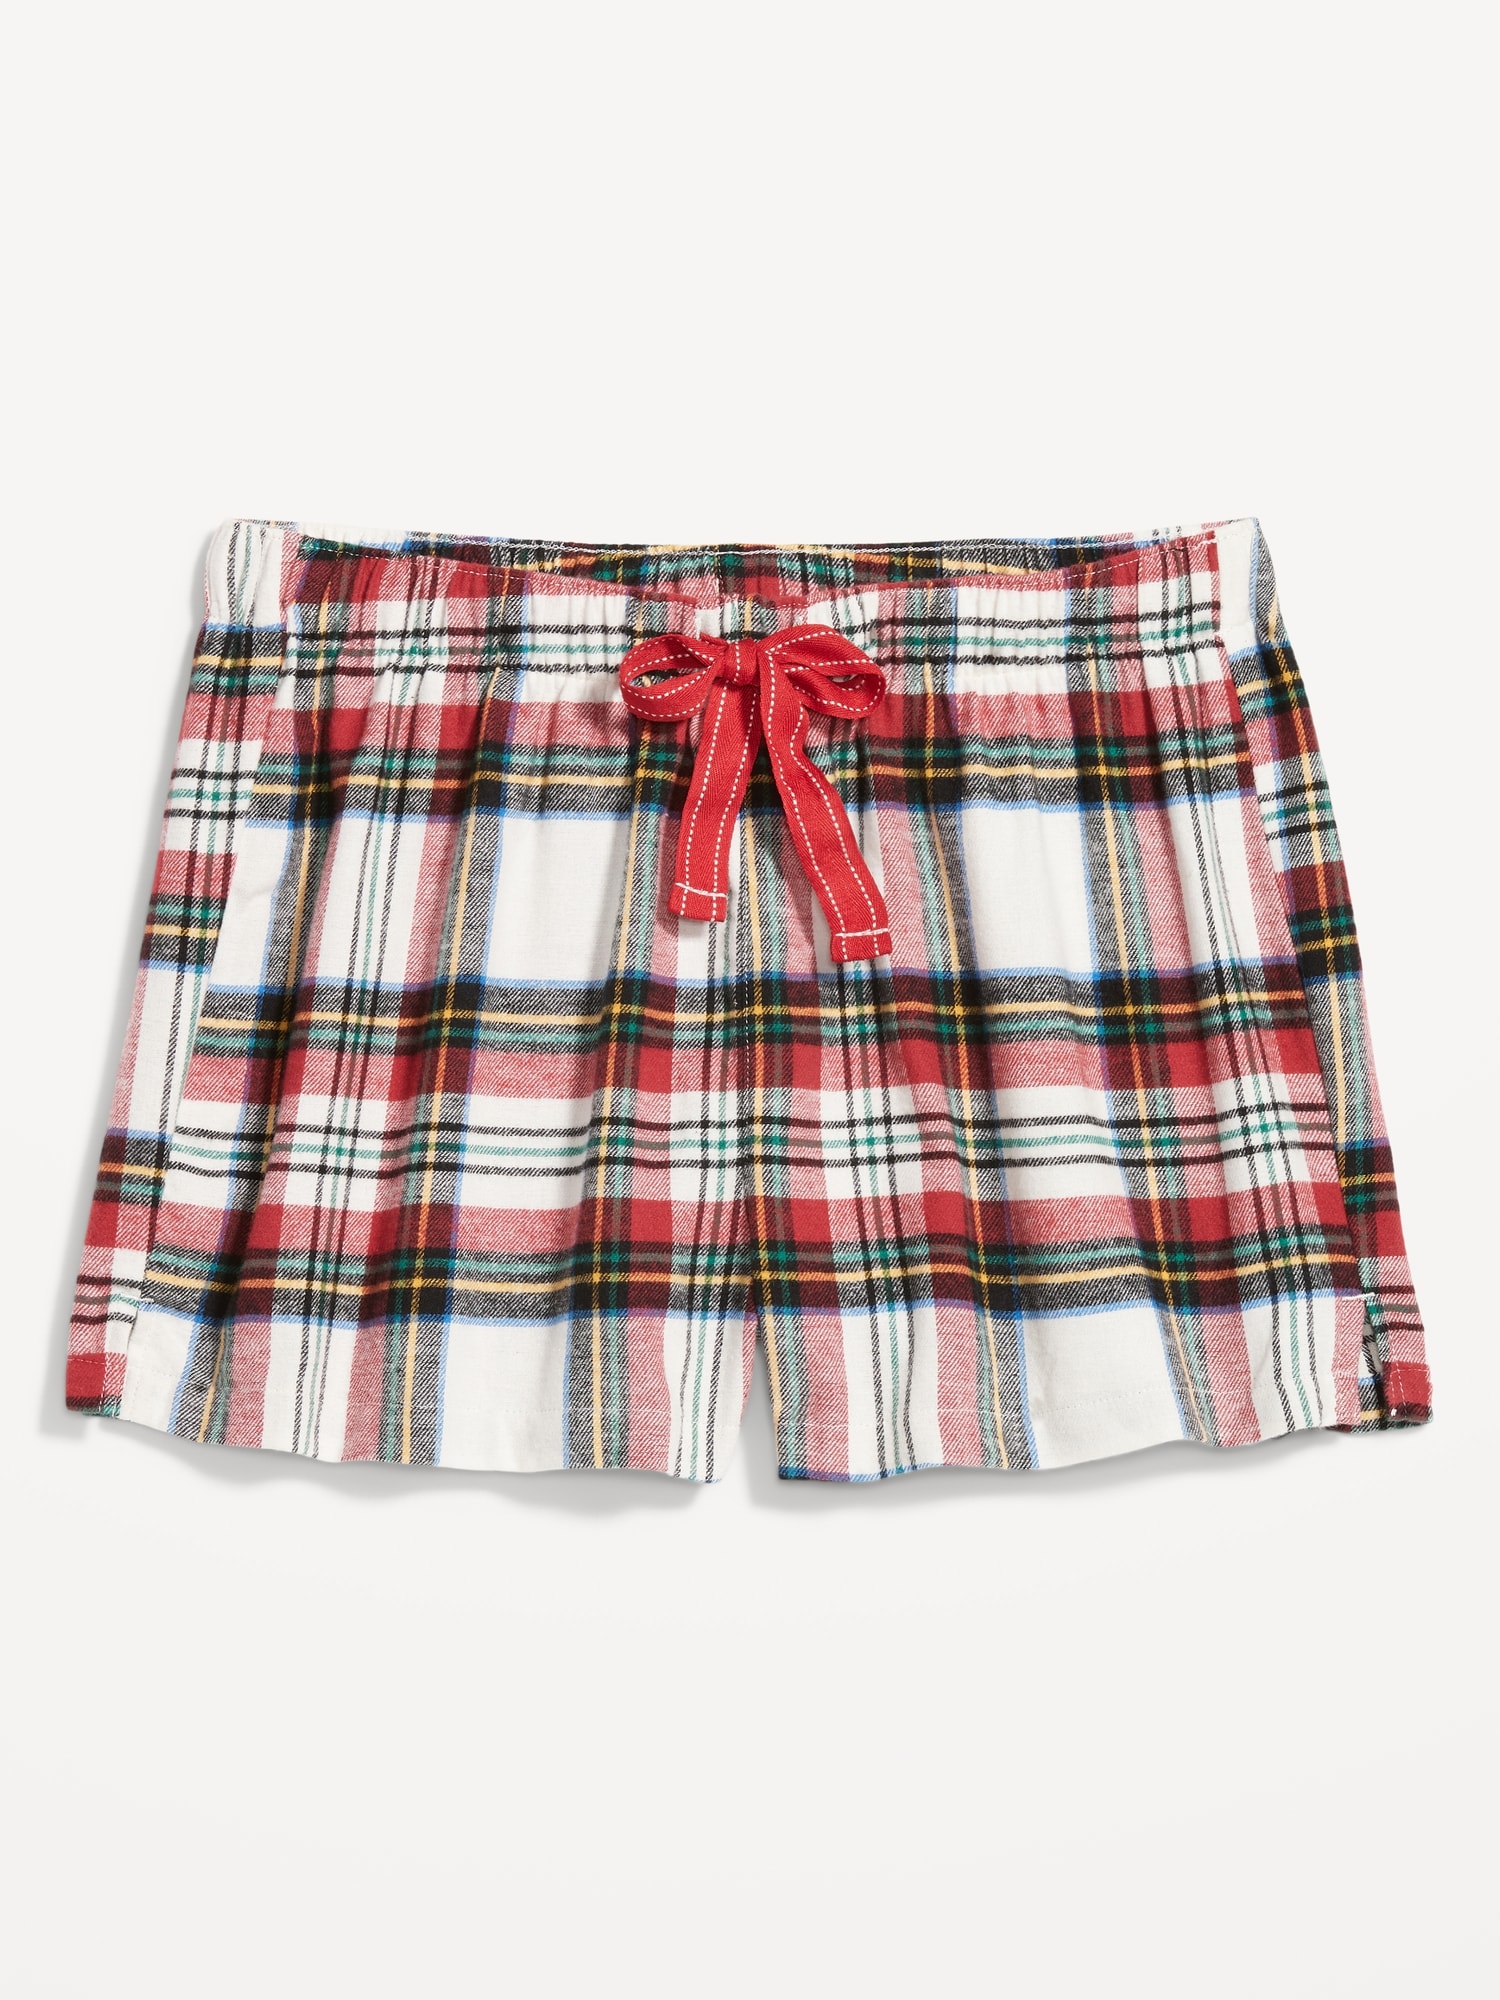 Old Navy: Women's Flannel PJ Shorts – only $7! – Wear It For Less